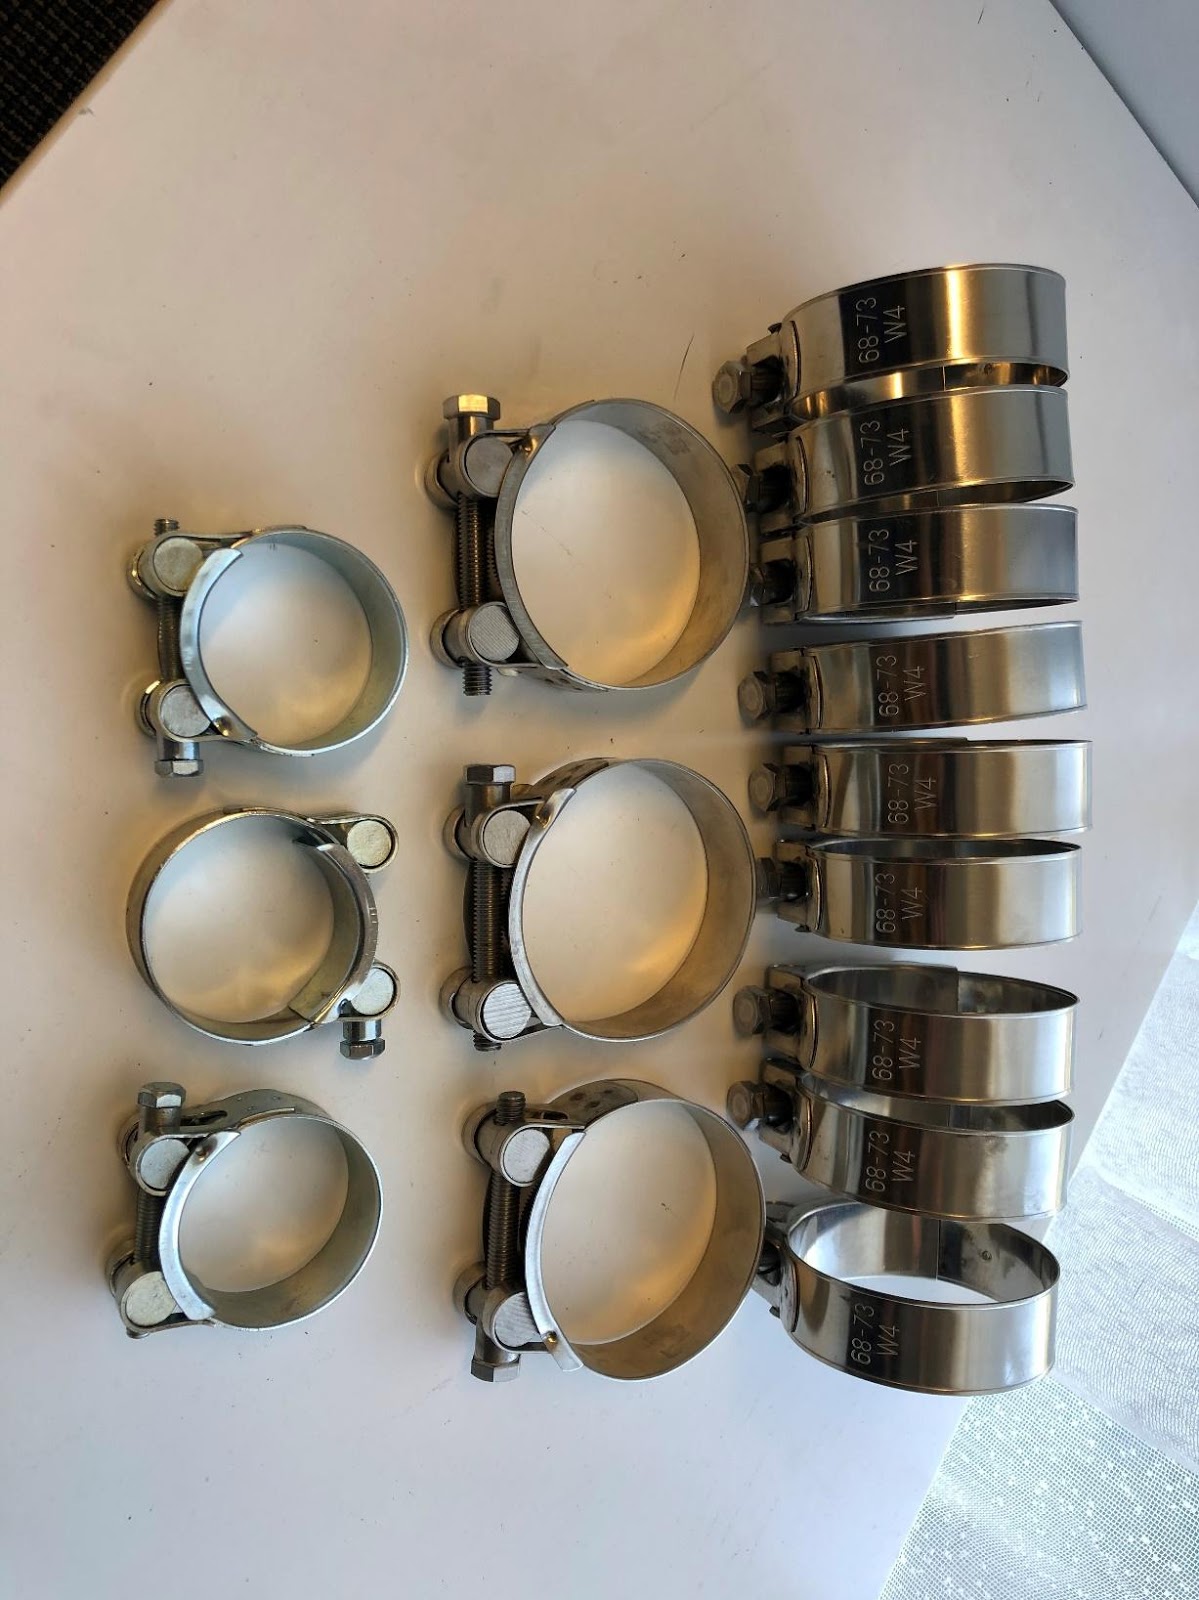 Array of T-Bolt clamps